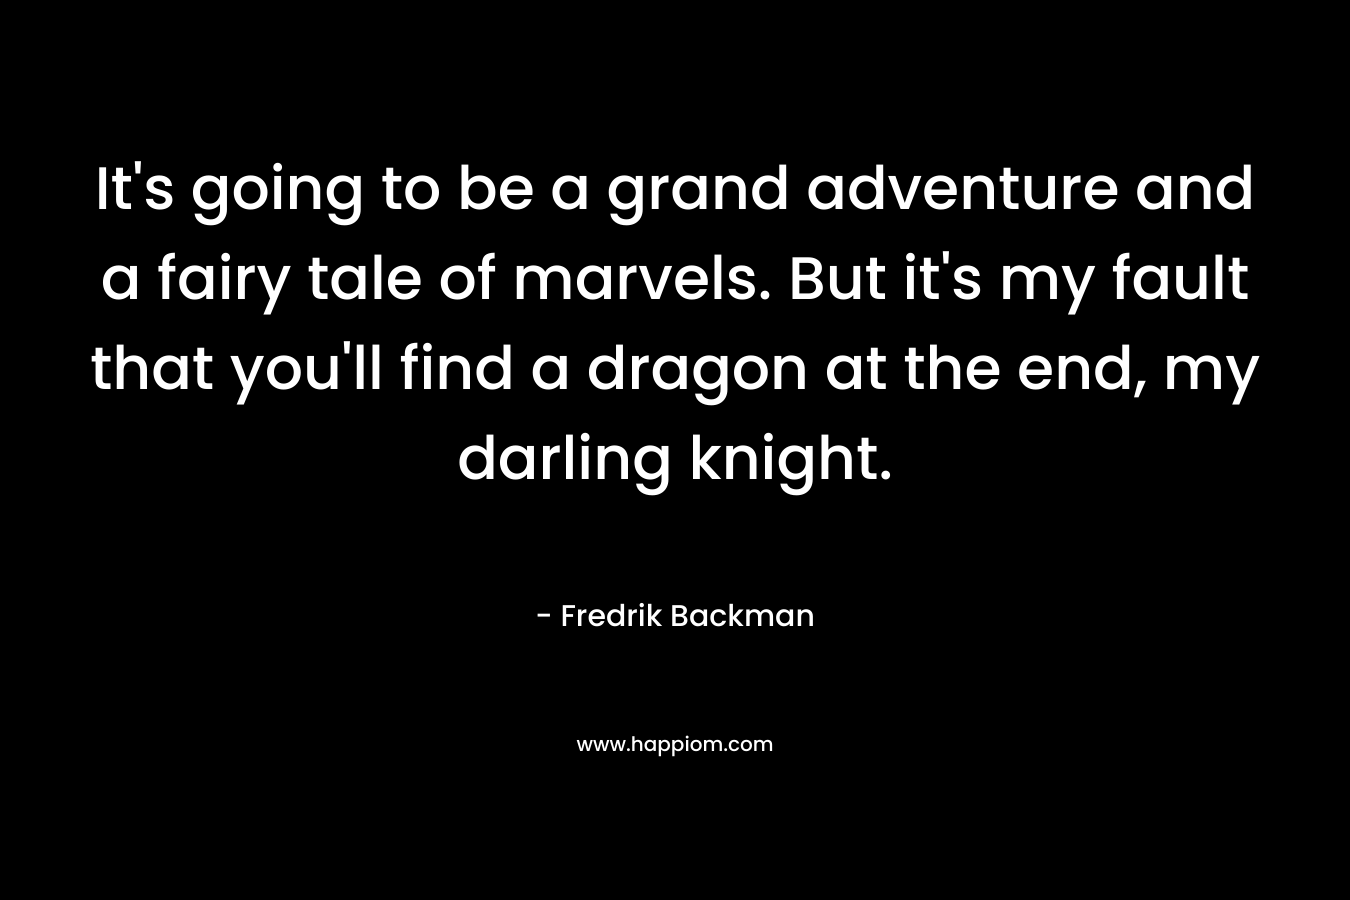 It’s going to be a grand adventure and a fairy tale of marvels. But it’s my fault that you’ll find a dragon at the end, my darling knight. – Fredrik Backman